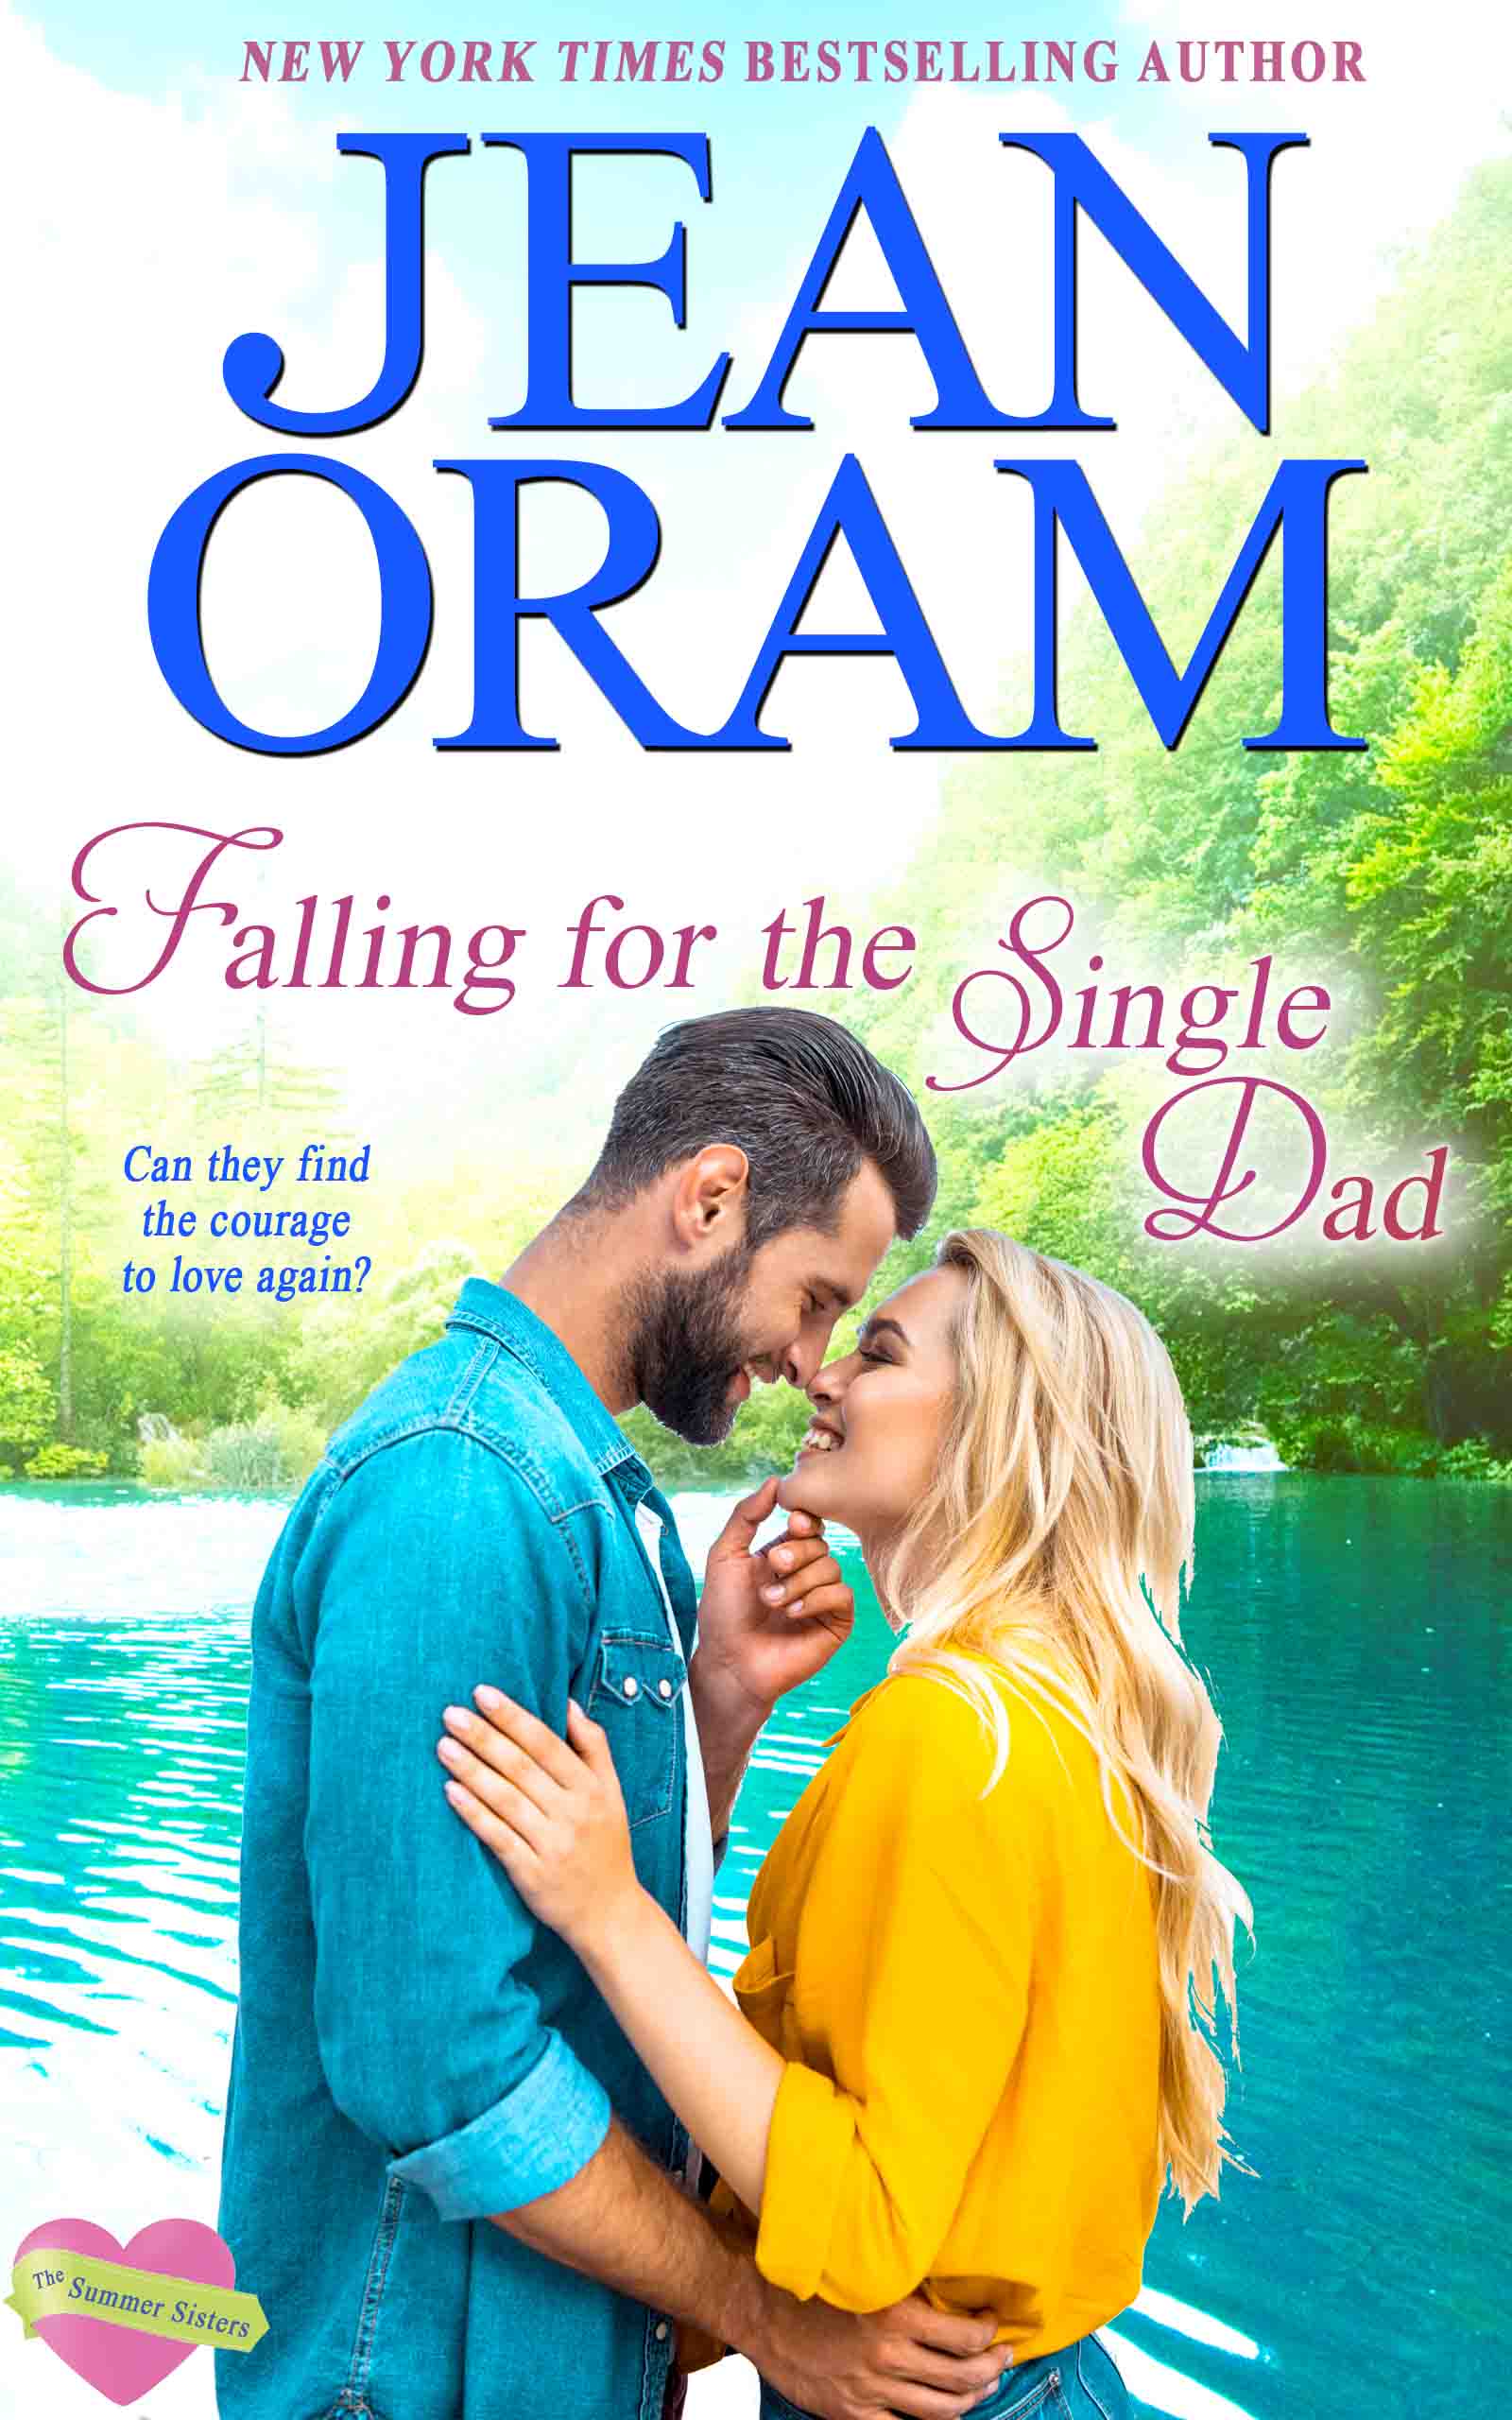 Falling for the Single Dad - Love and Trust by Jean Oram. Irresistible sweet small town romances. The Summer Sisters billionaire bachelor sweet romance.